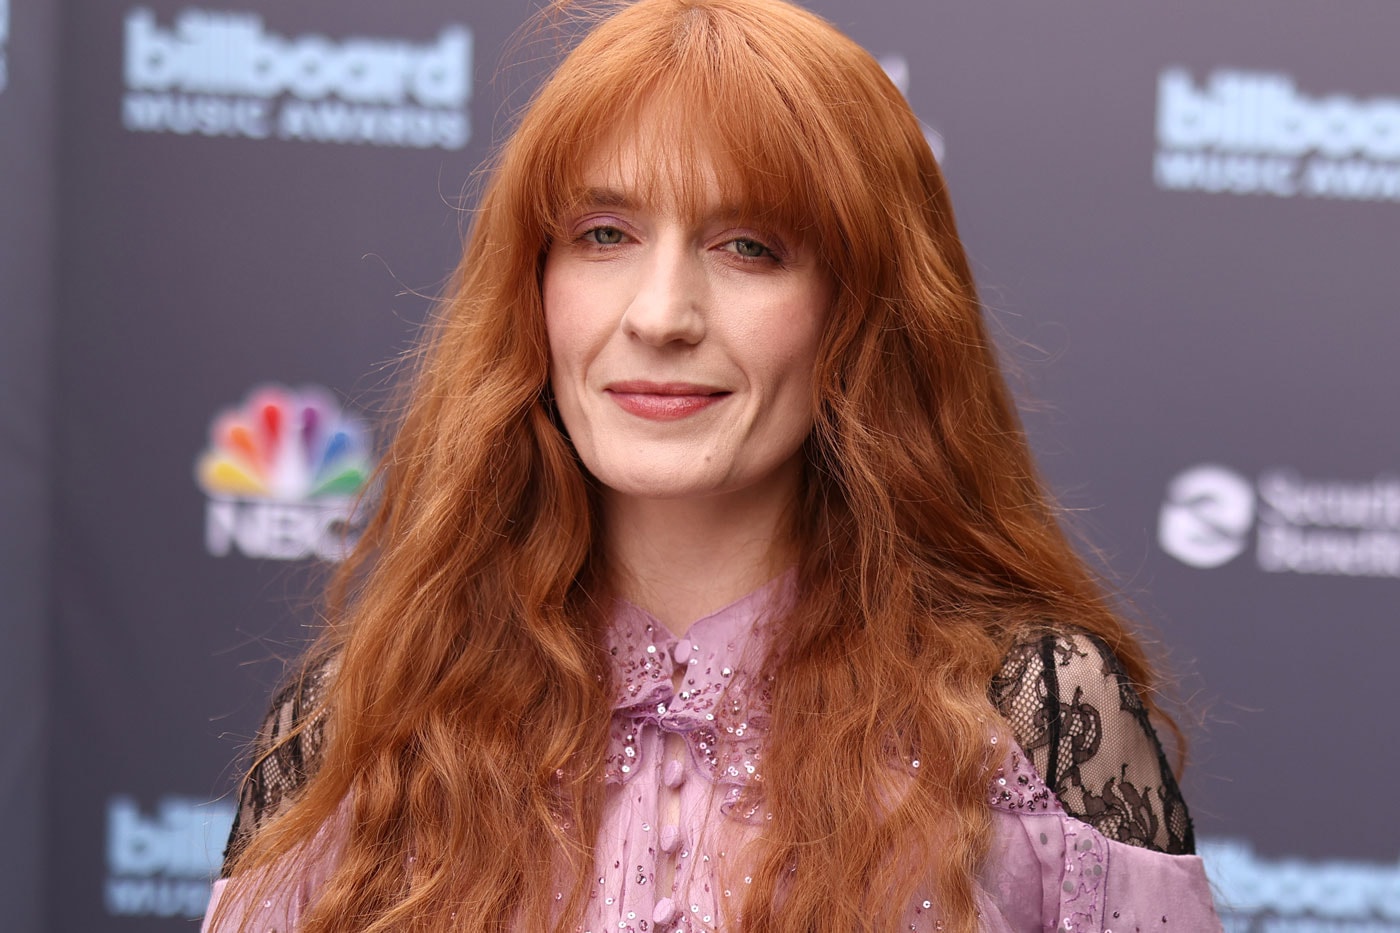 Florence + the Machine Covered Eagles of Death Metal